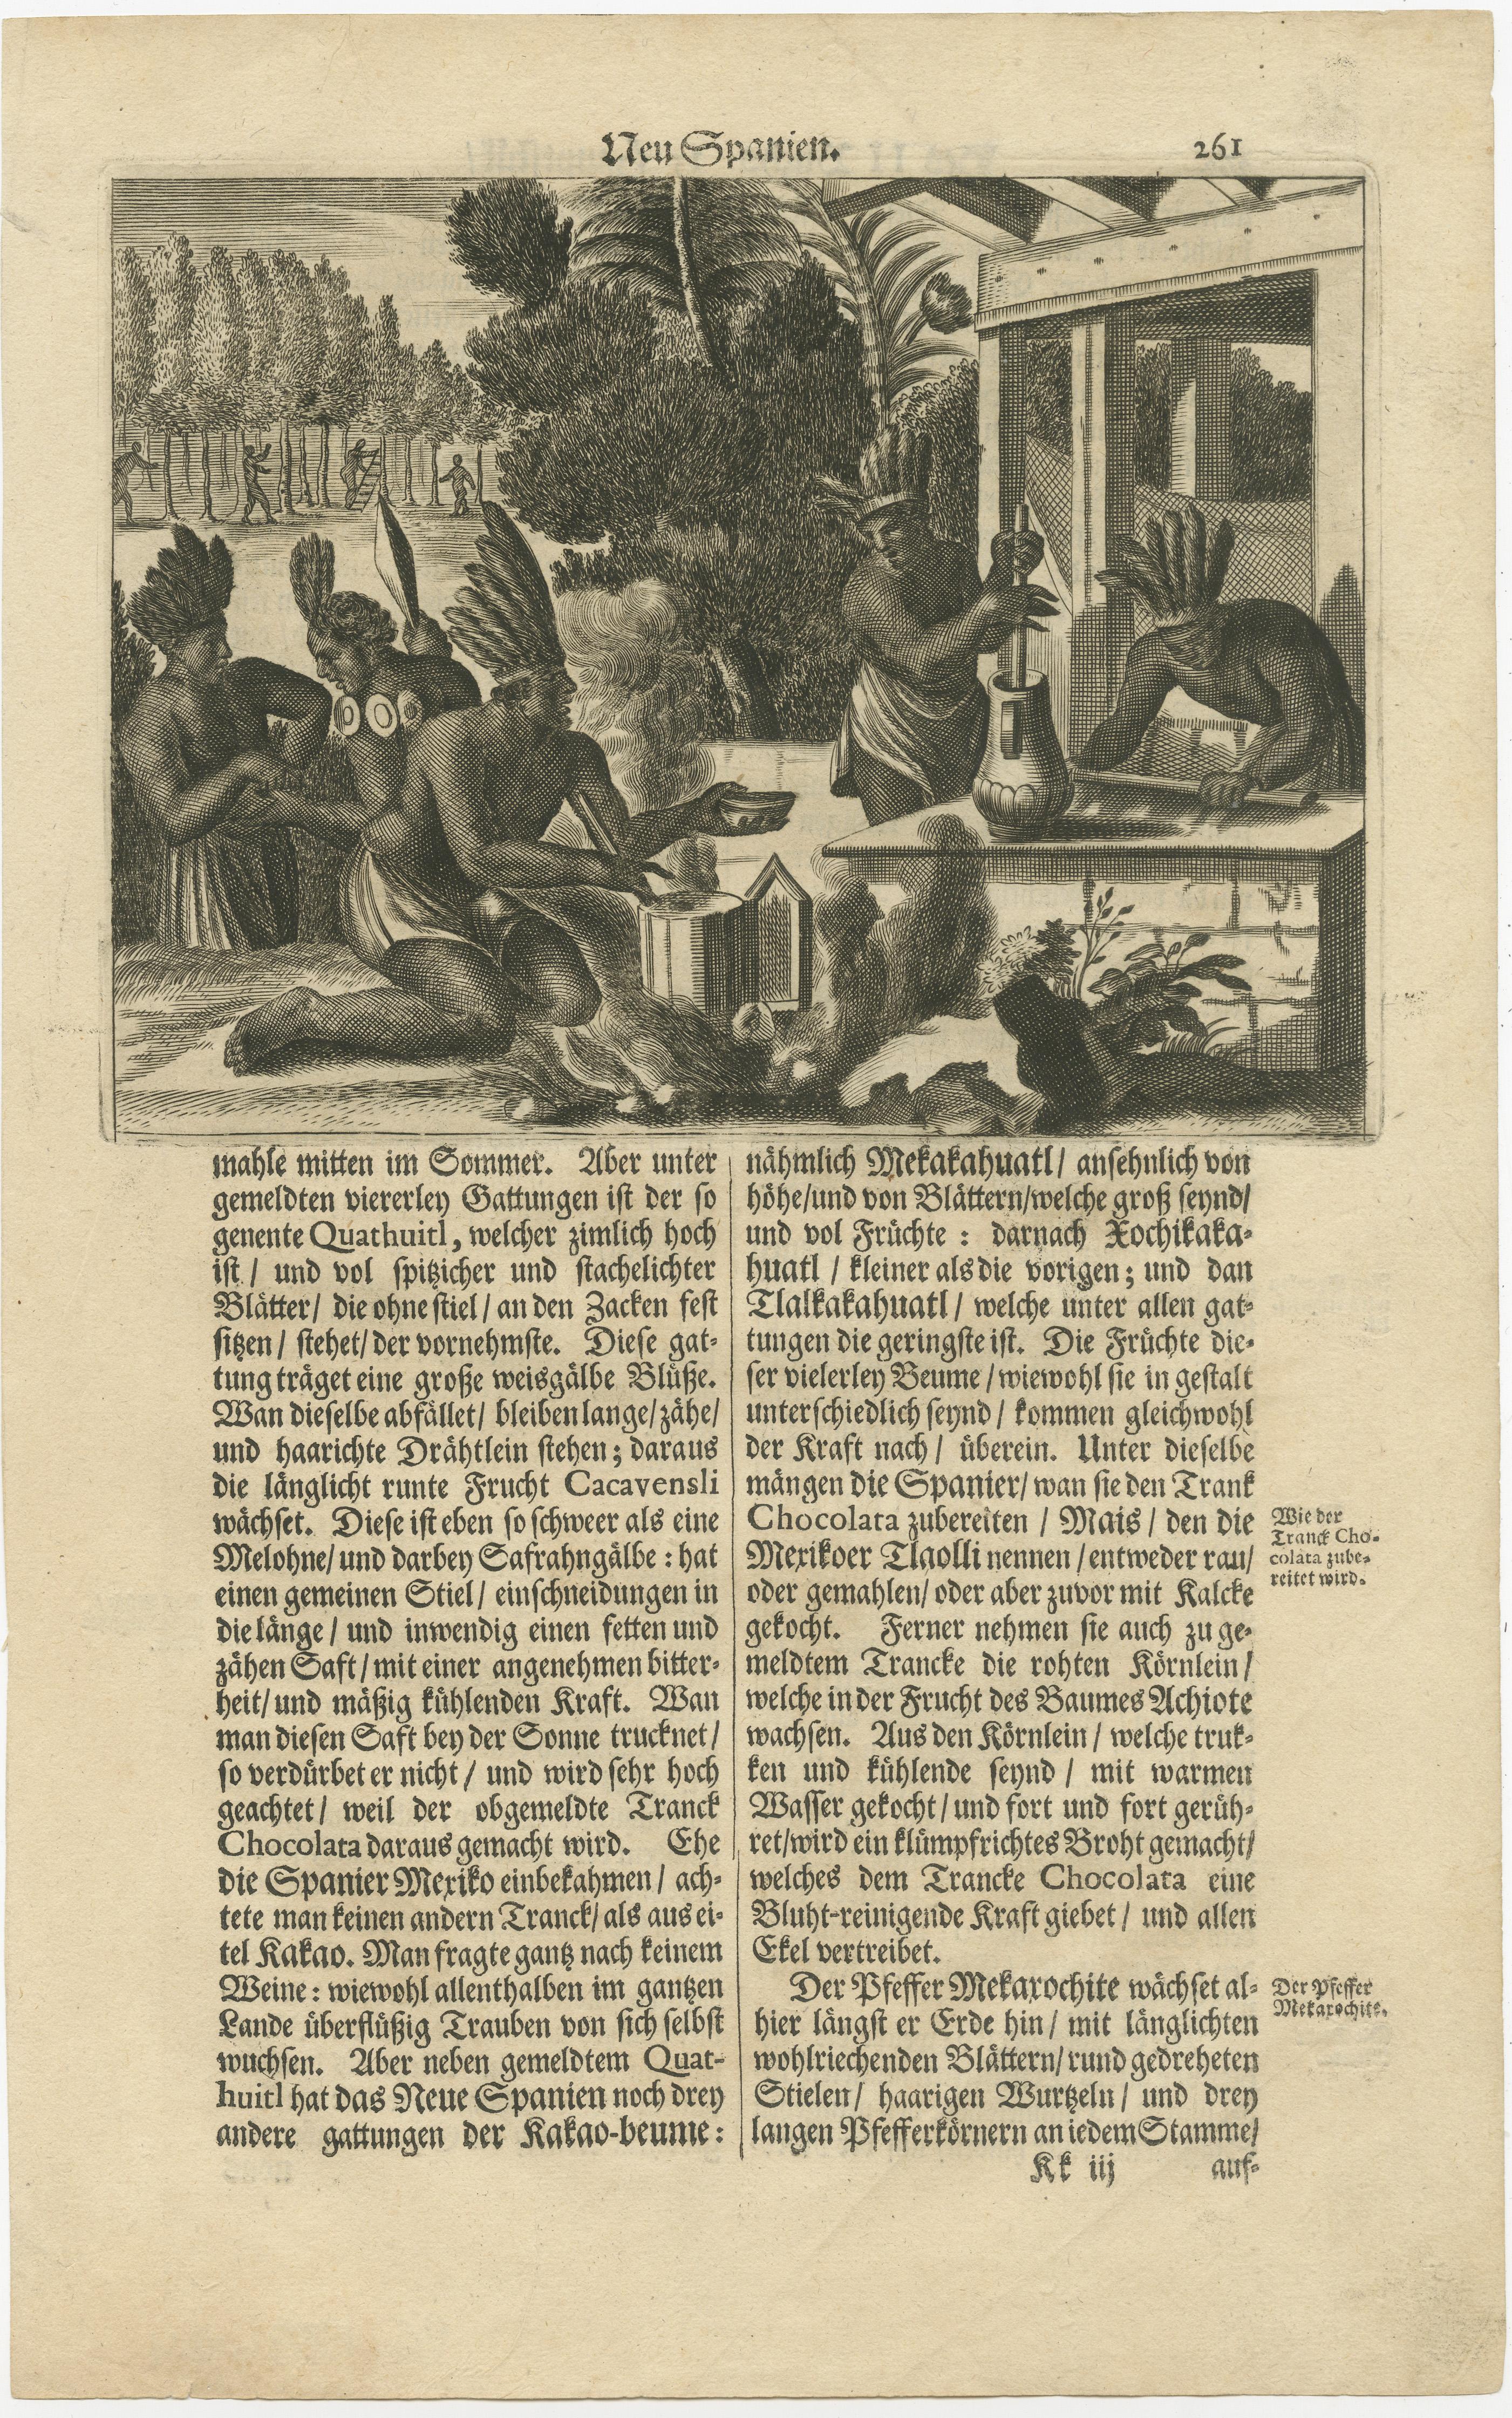 This original copper engraving depicts a lively scene of daily life in New Spain from Arnoldus Montanus' 